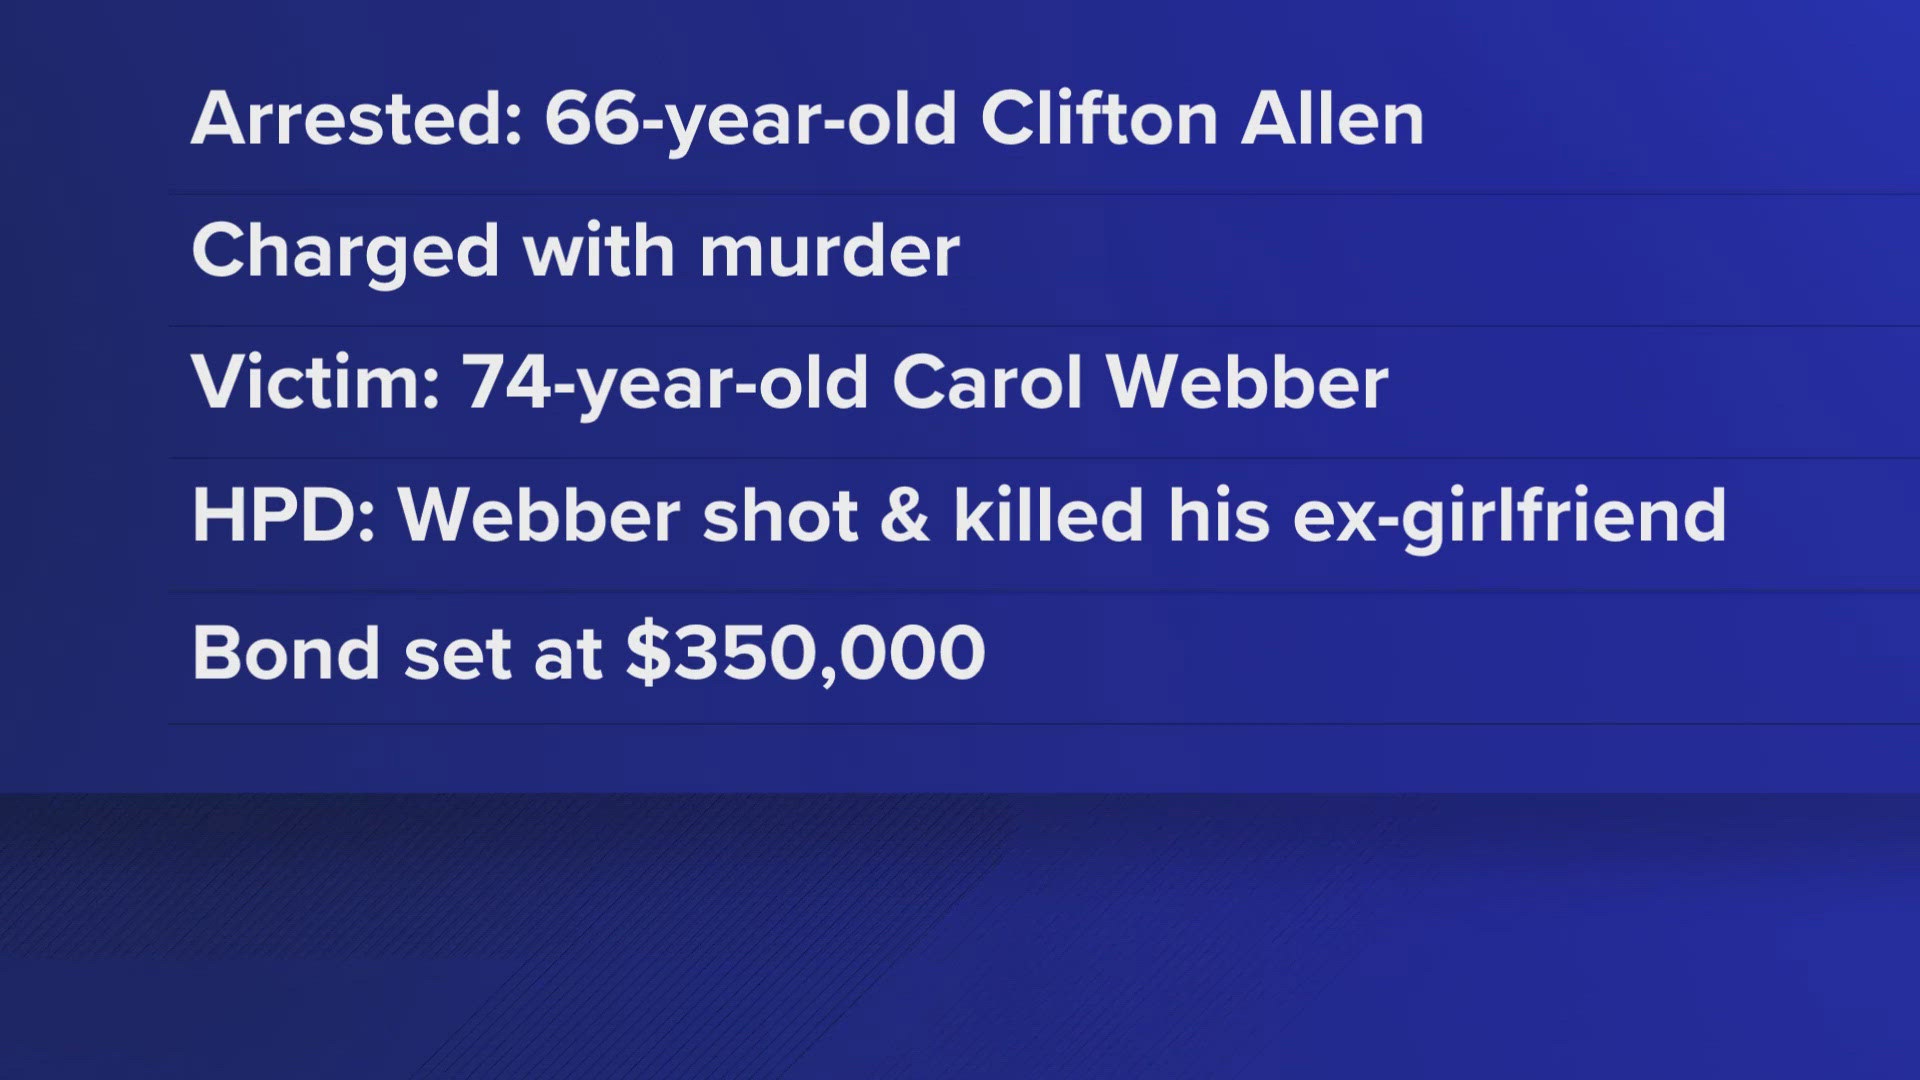 Houston police said the victim, Carol Webber, 74, and the suspect, Clifton John Allen, 66, were previously involved in a dating relationship.